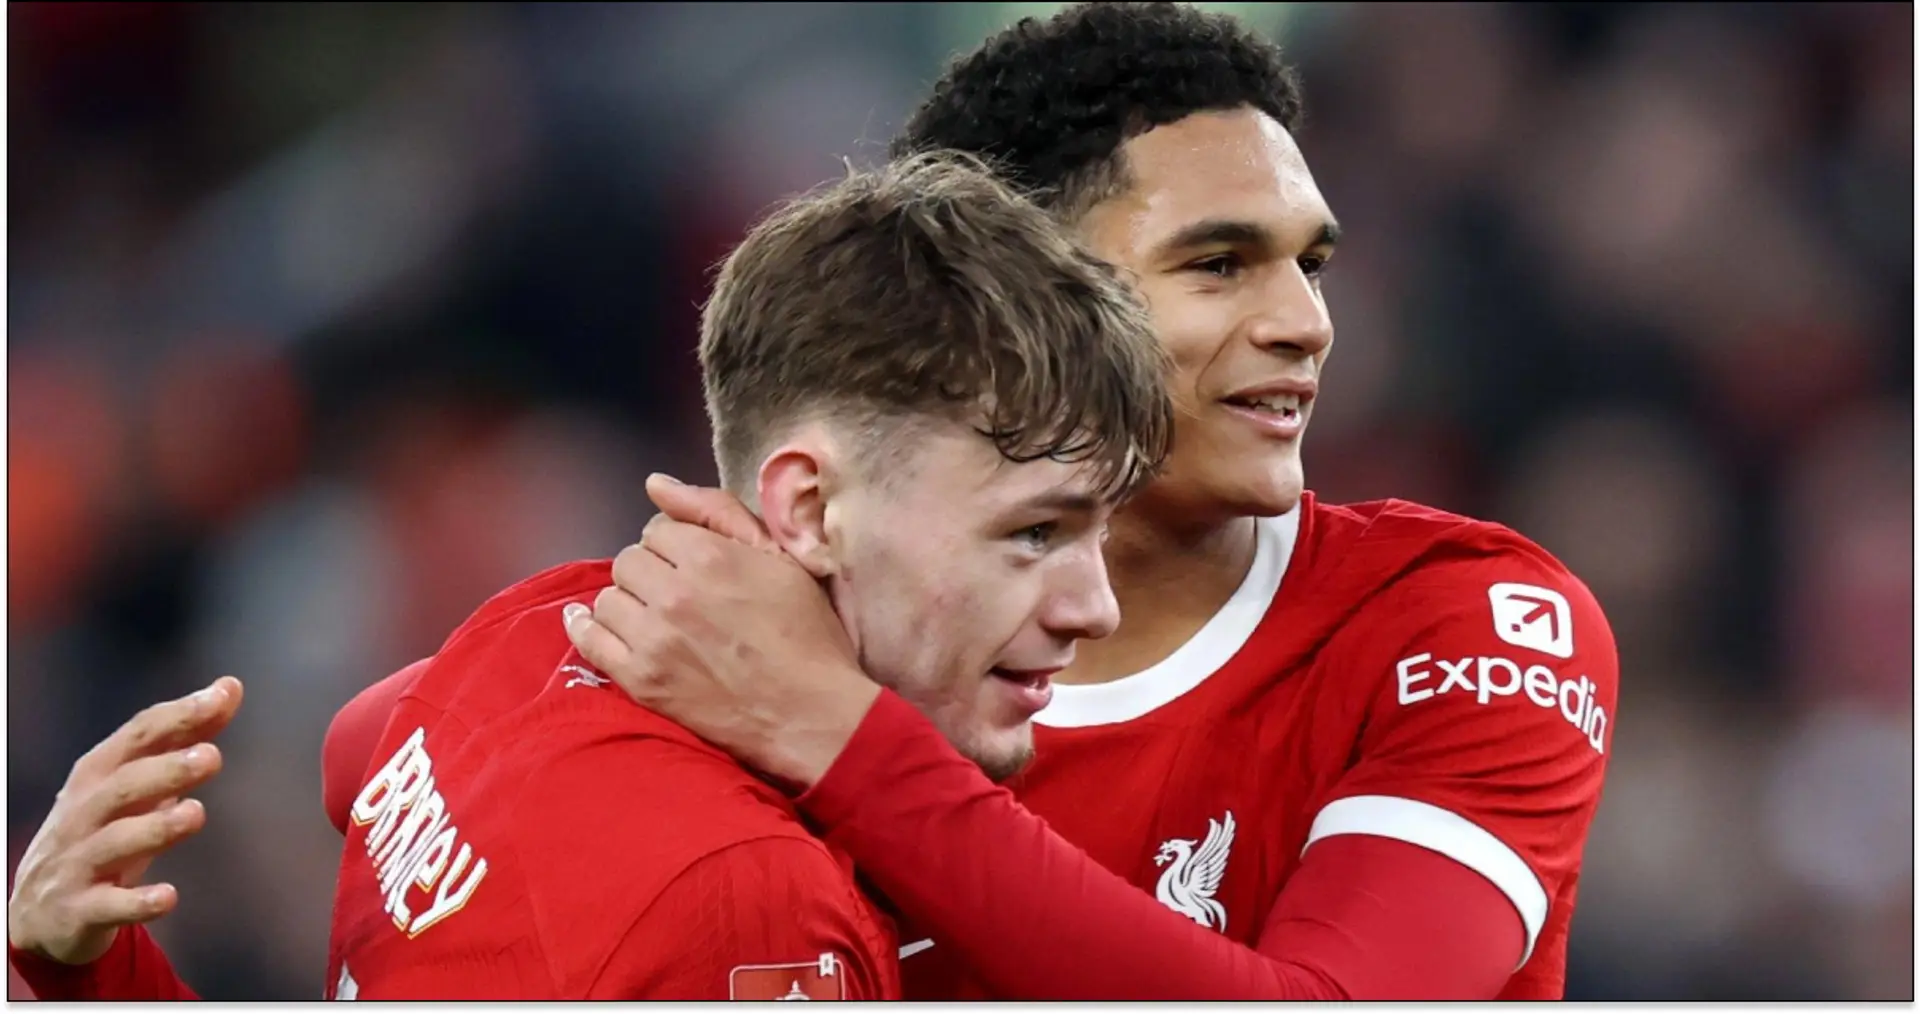 'No one bats an eyelid if Quansah or Bradley start now': Liverpool U21s boss on youngsters' progress